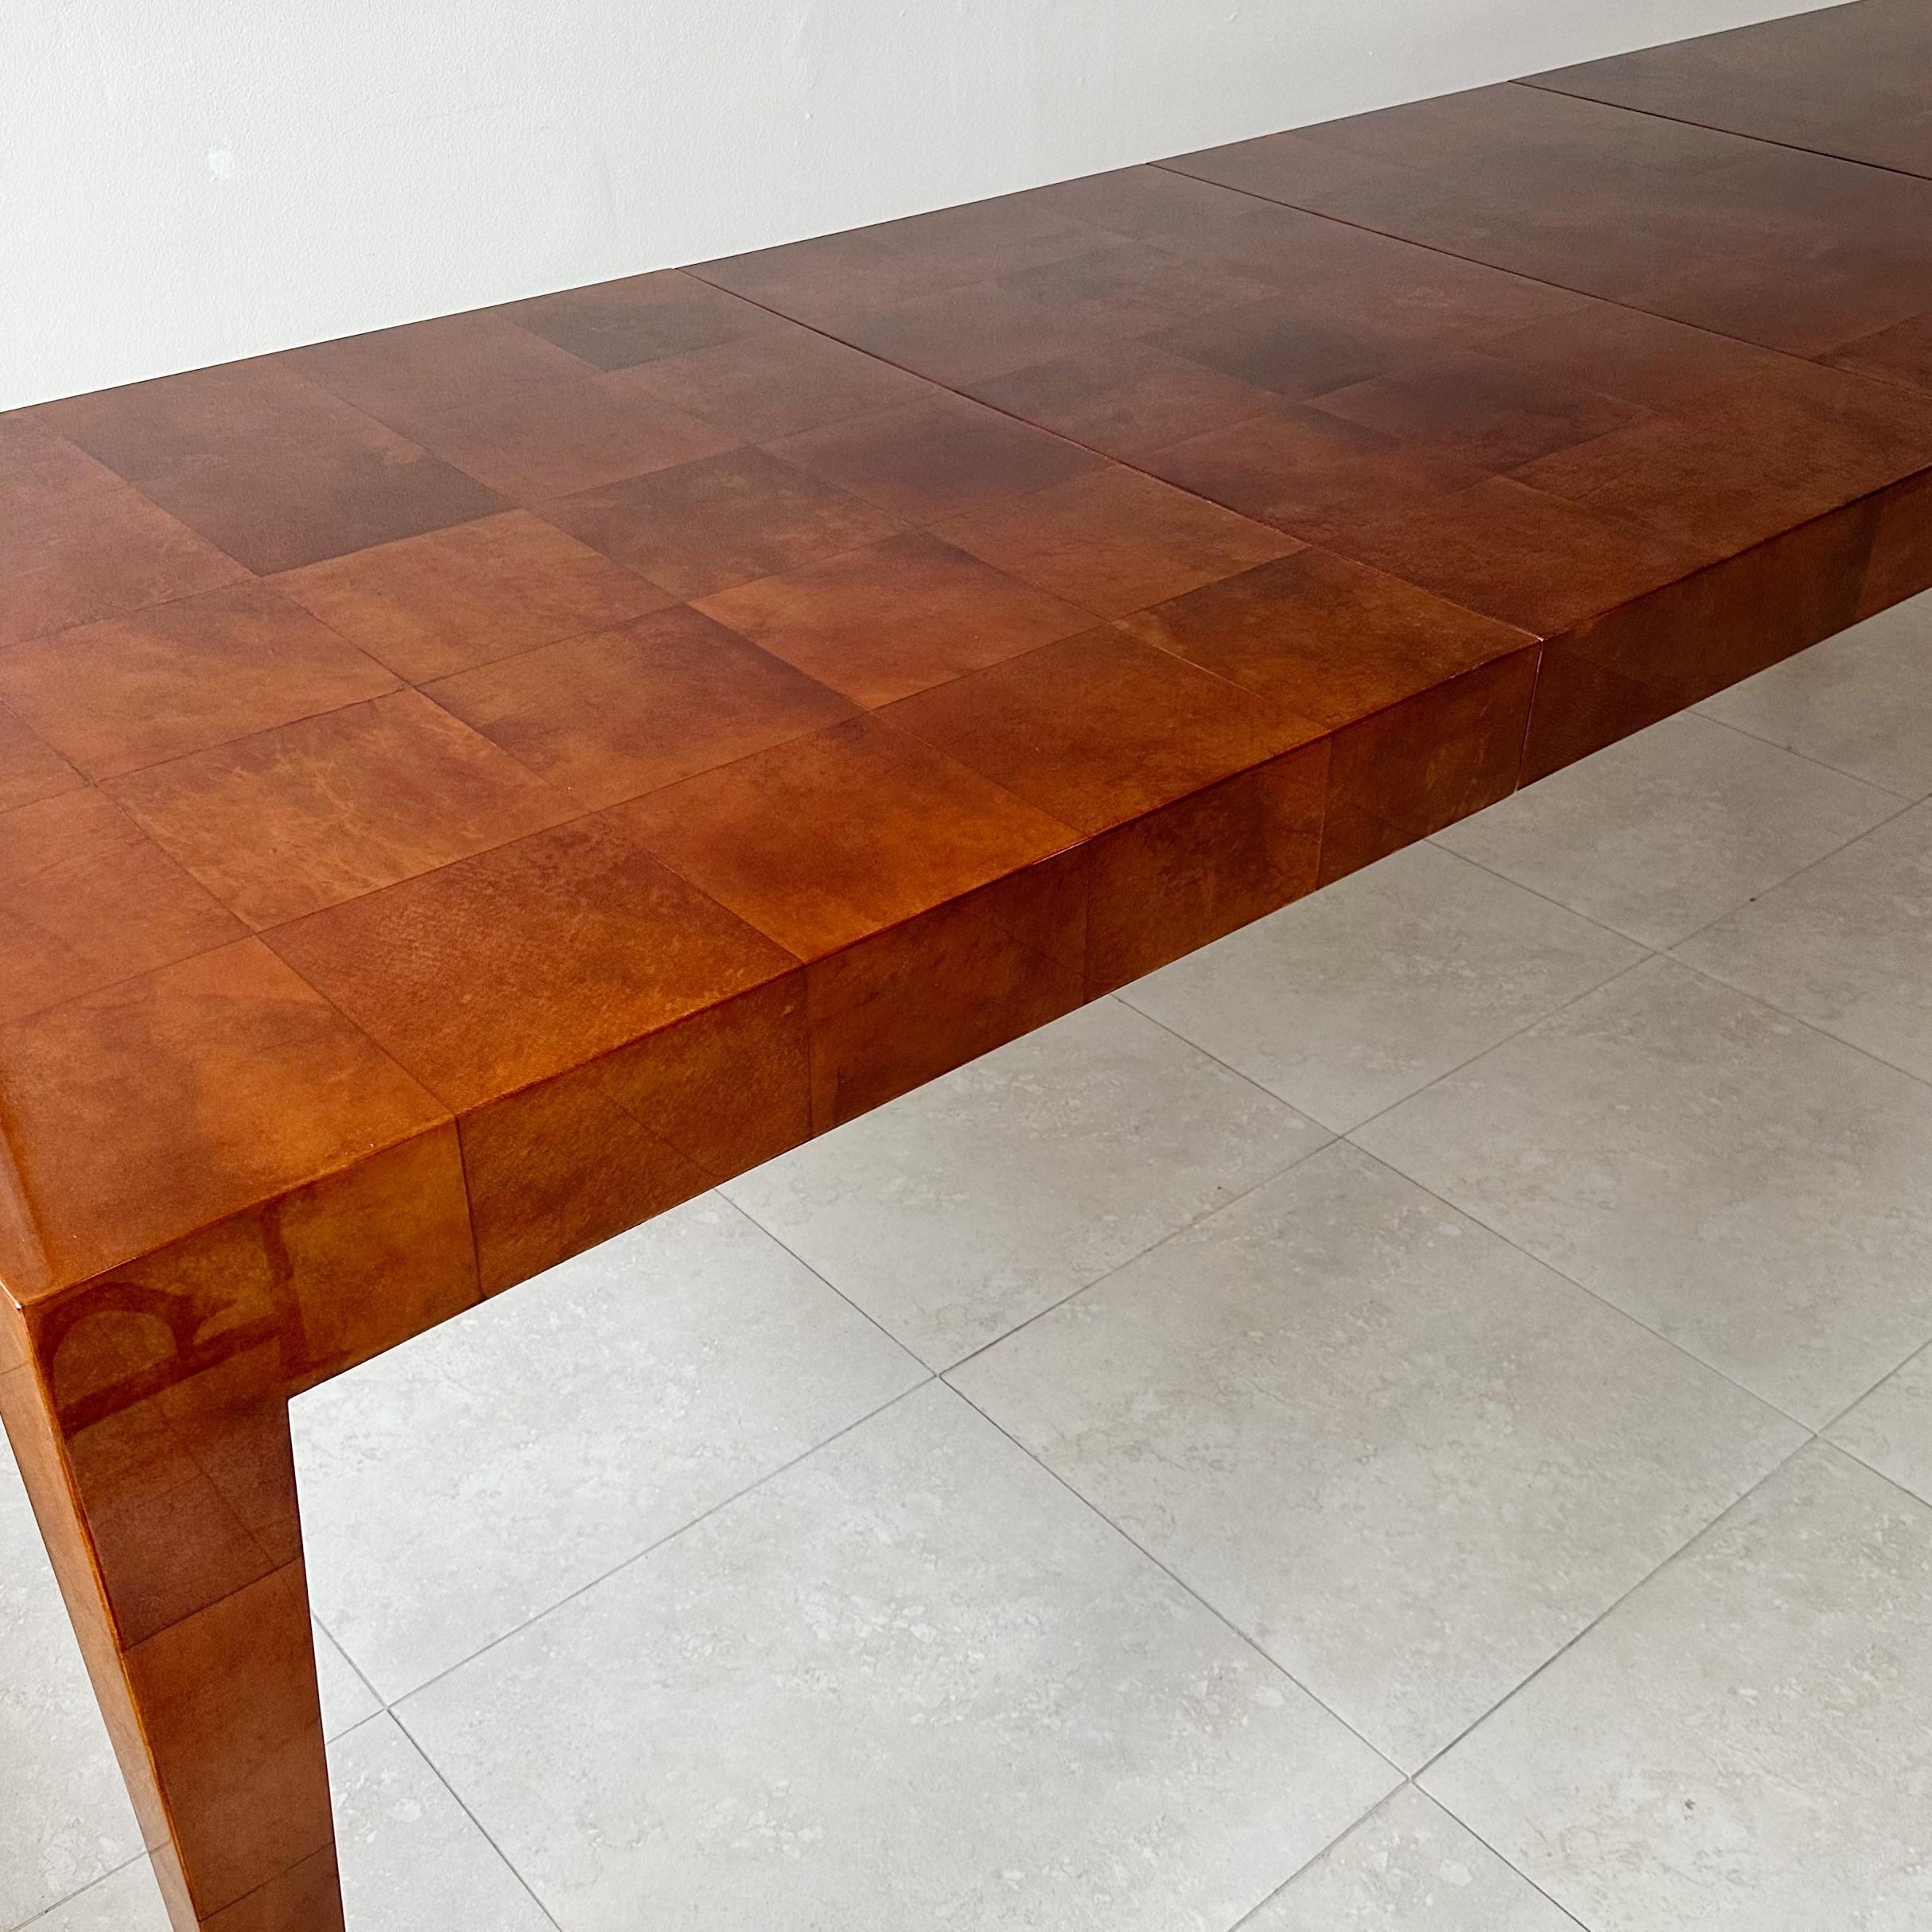 Long 1980s goatskin dining table that is 112